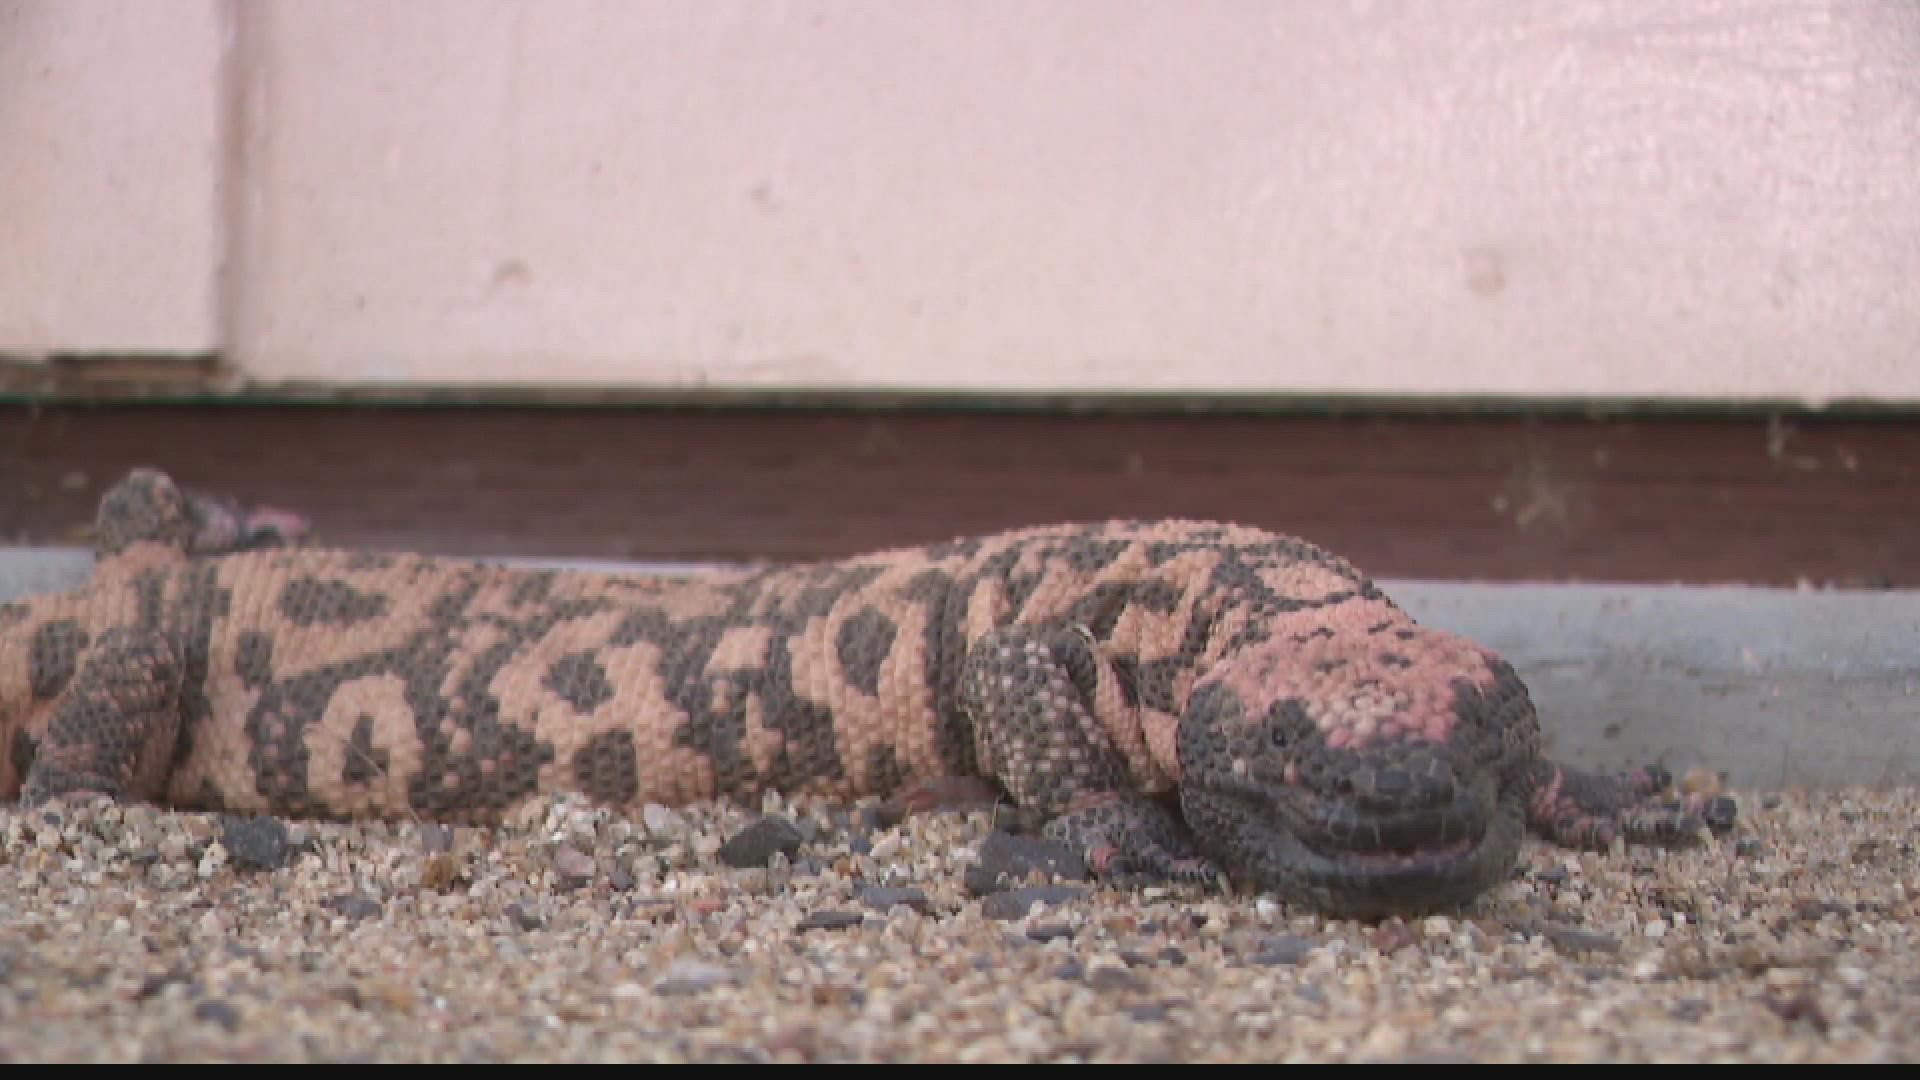 A shy Gila monster was recently found hiding inside a new home in Mesa. Rattlesnake Solutions safely retrieved the venomous lizard and relocated it.